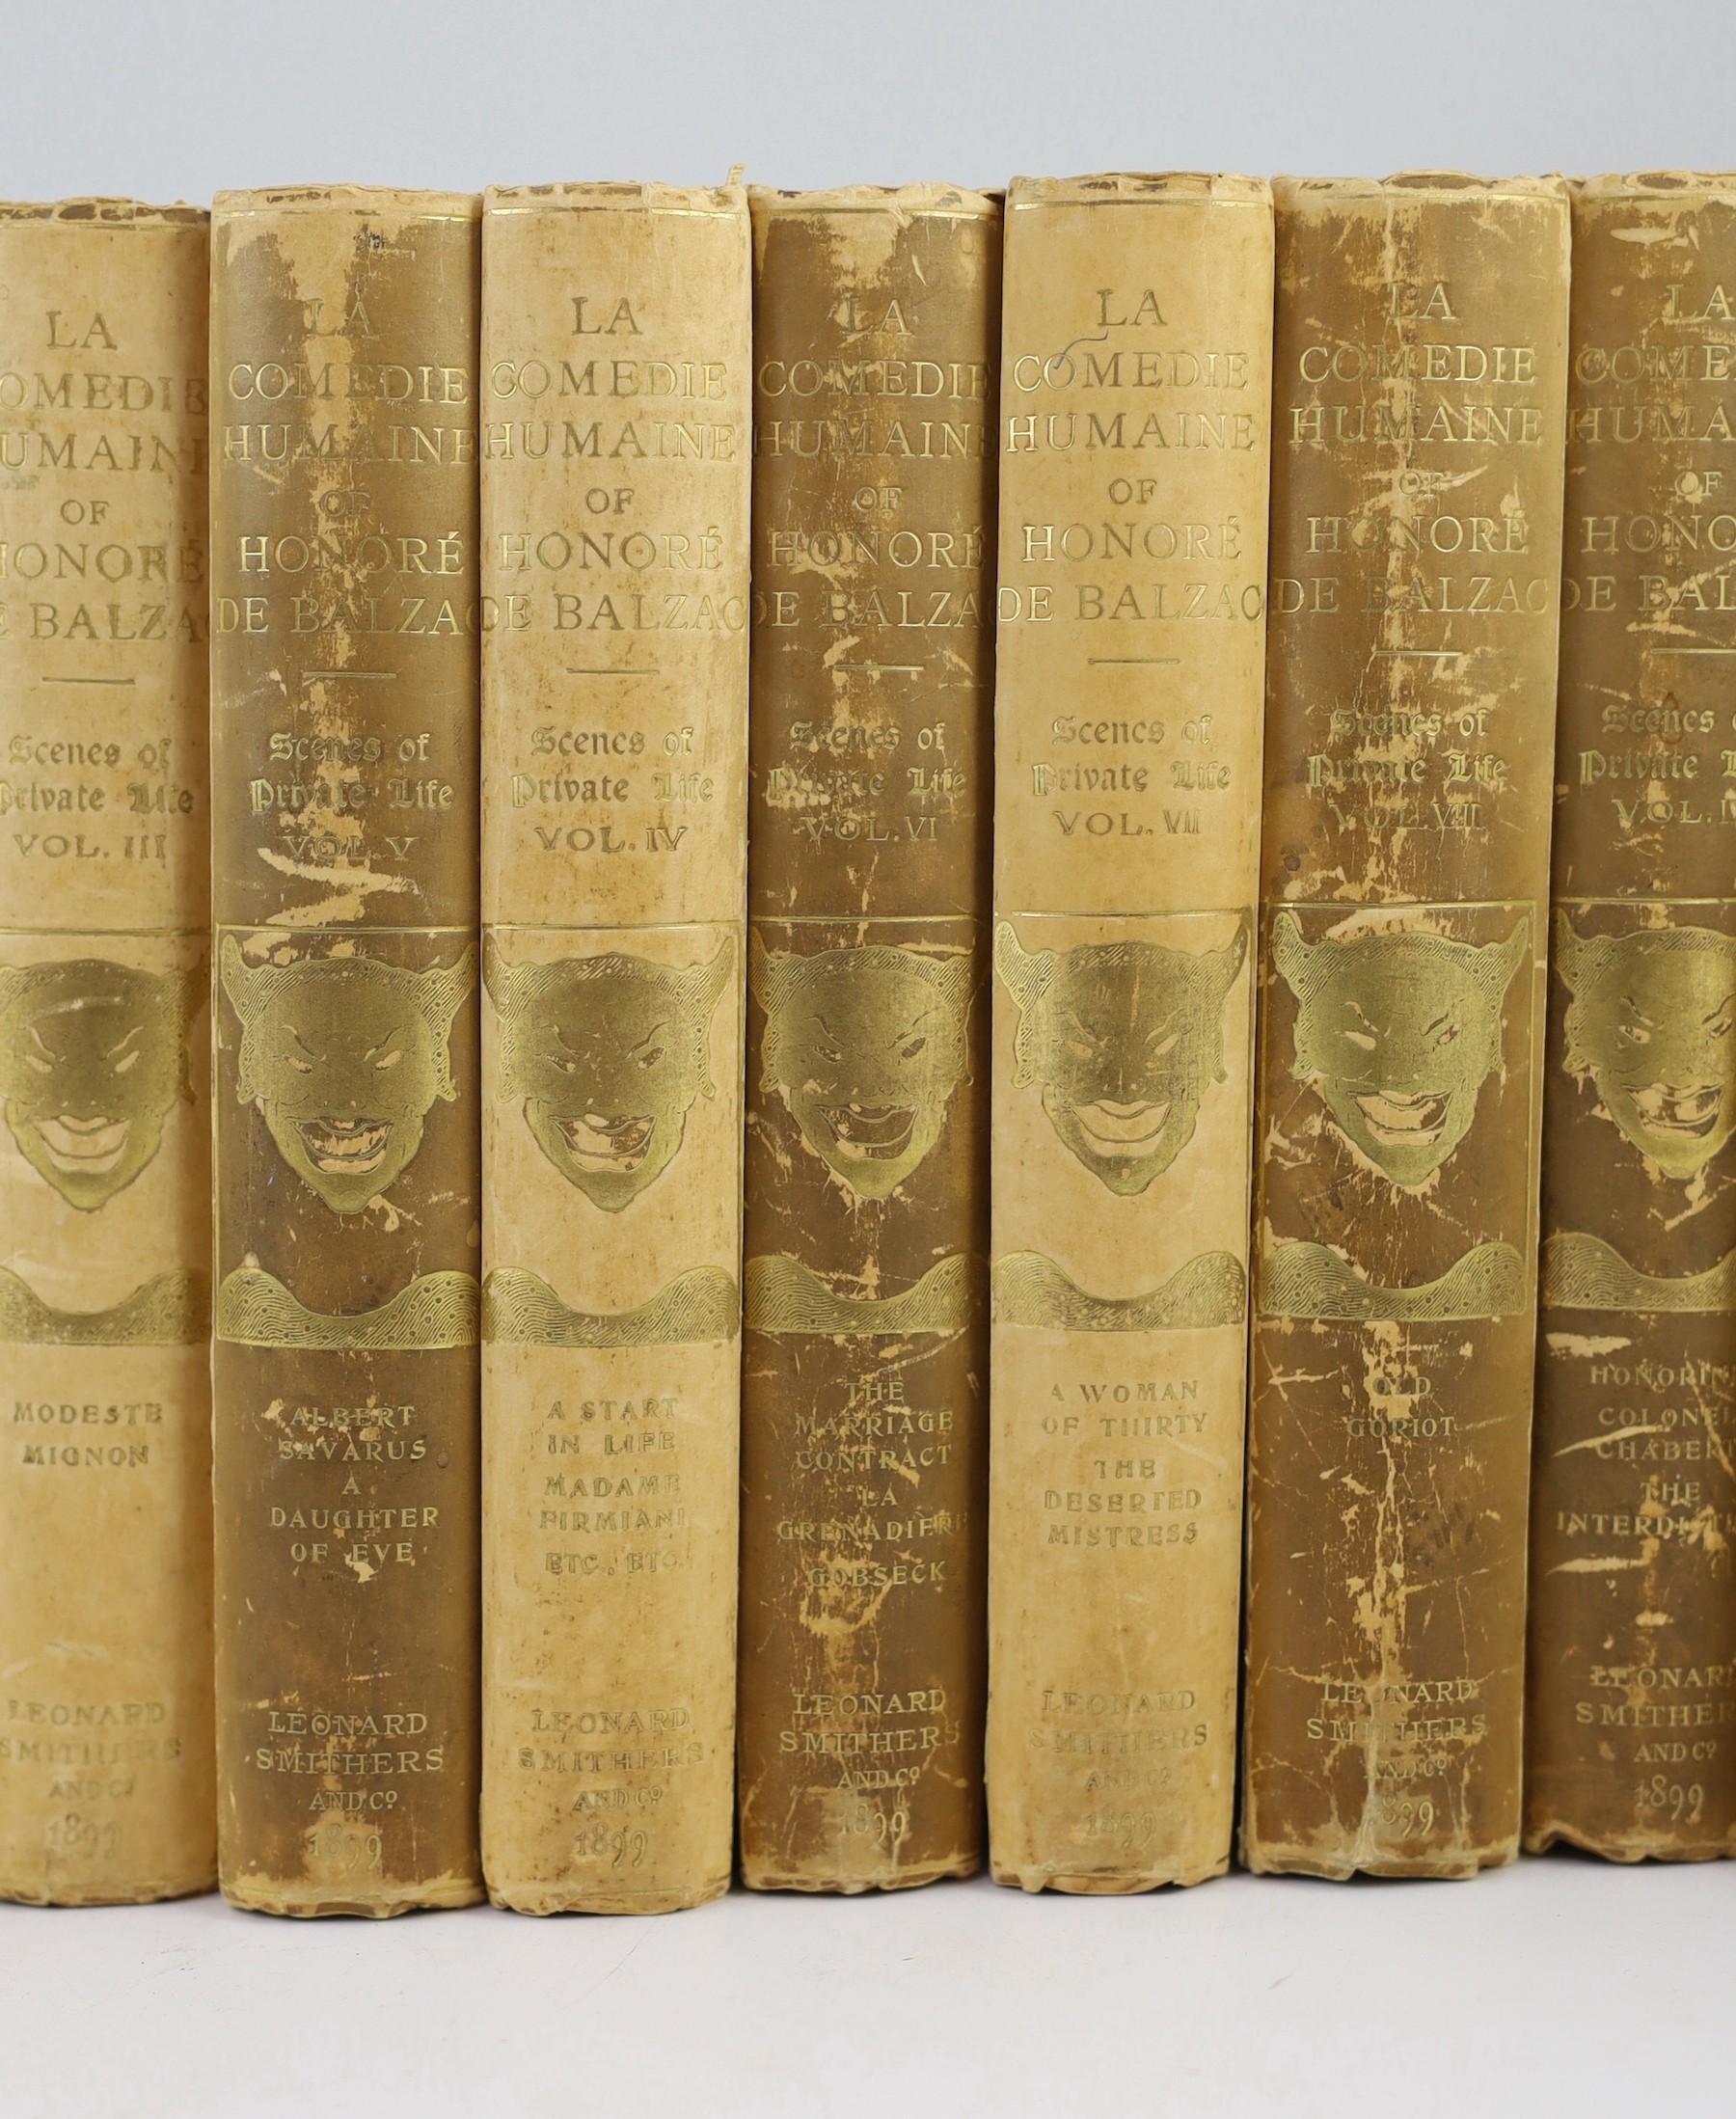 Balzac-Honore de - La Comedie Humaine ... (translated from the French) comprising: Scenes of Parisian Life (11 vols) & Scenes of Private Life (11 vols). Limited Editions. num. mounted plates (with captioned guards); publ